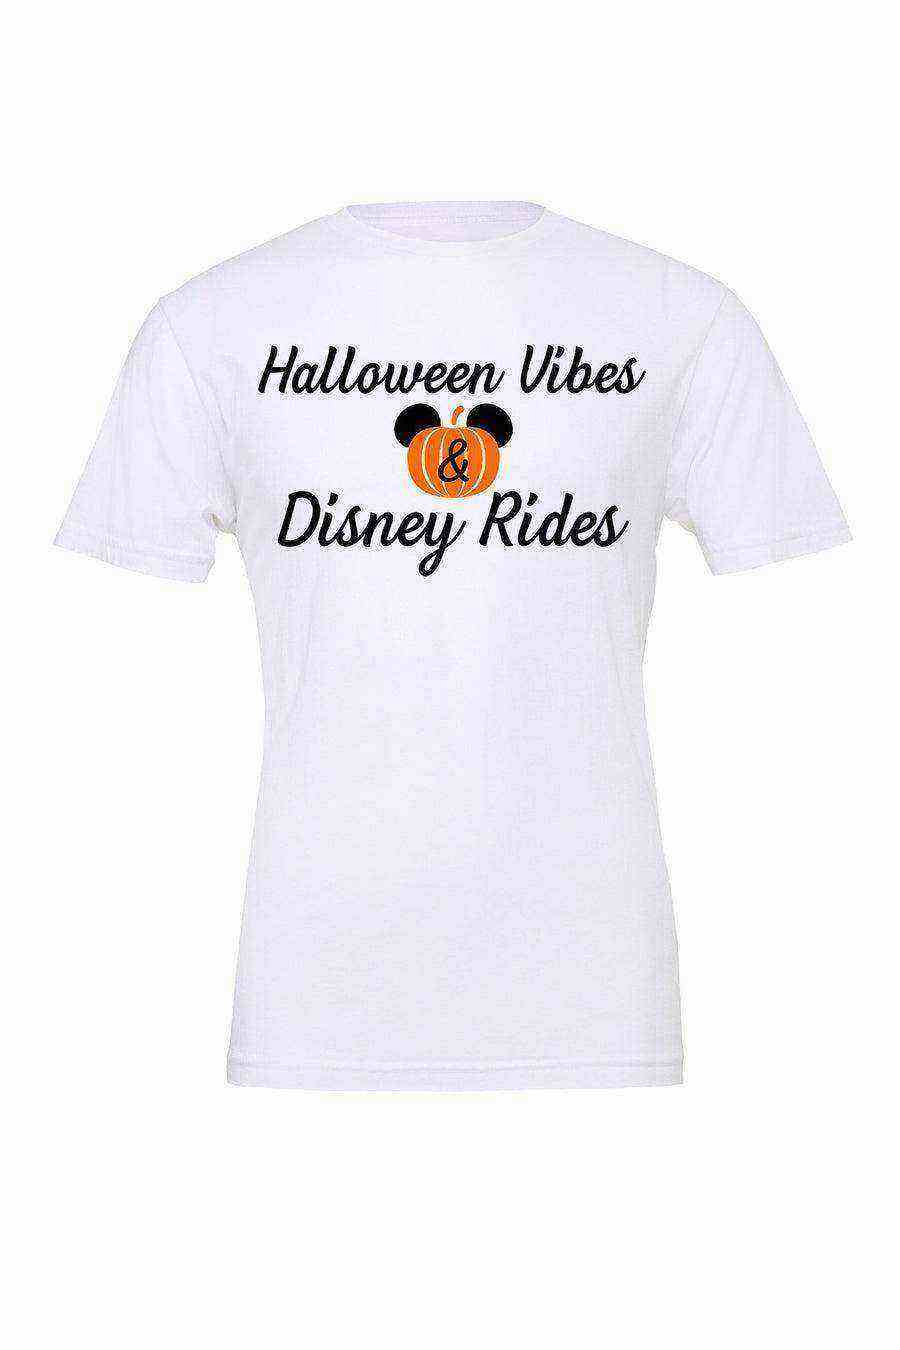 Halloween Vibes and Rides Shirt - Dylan's Tees